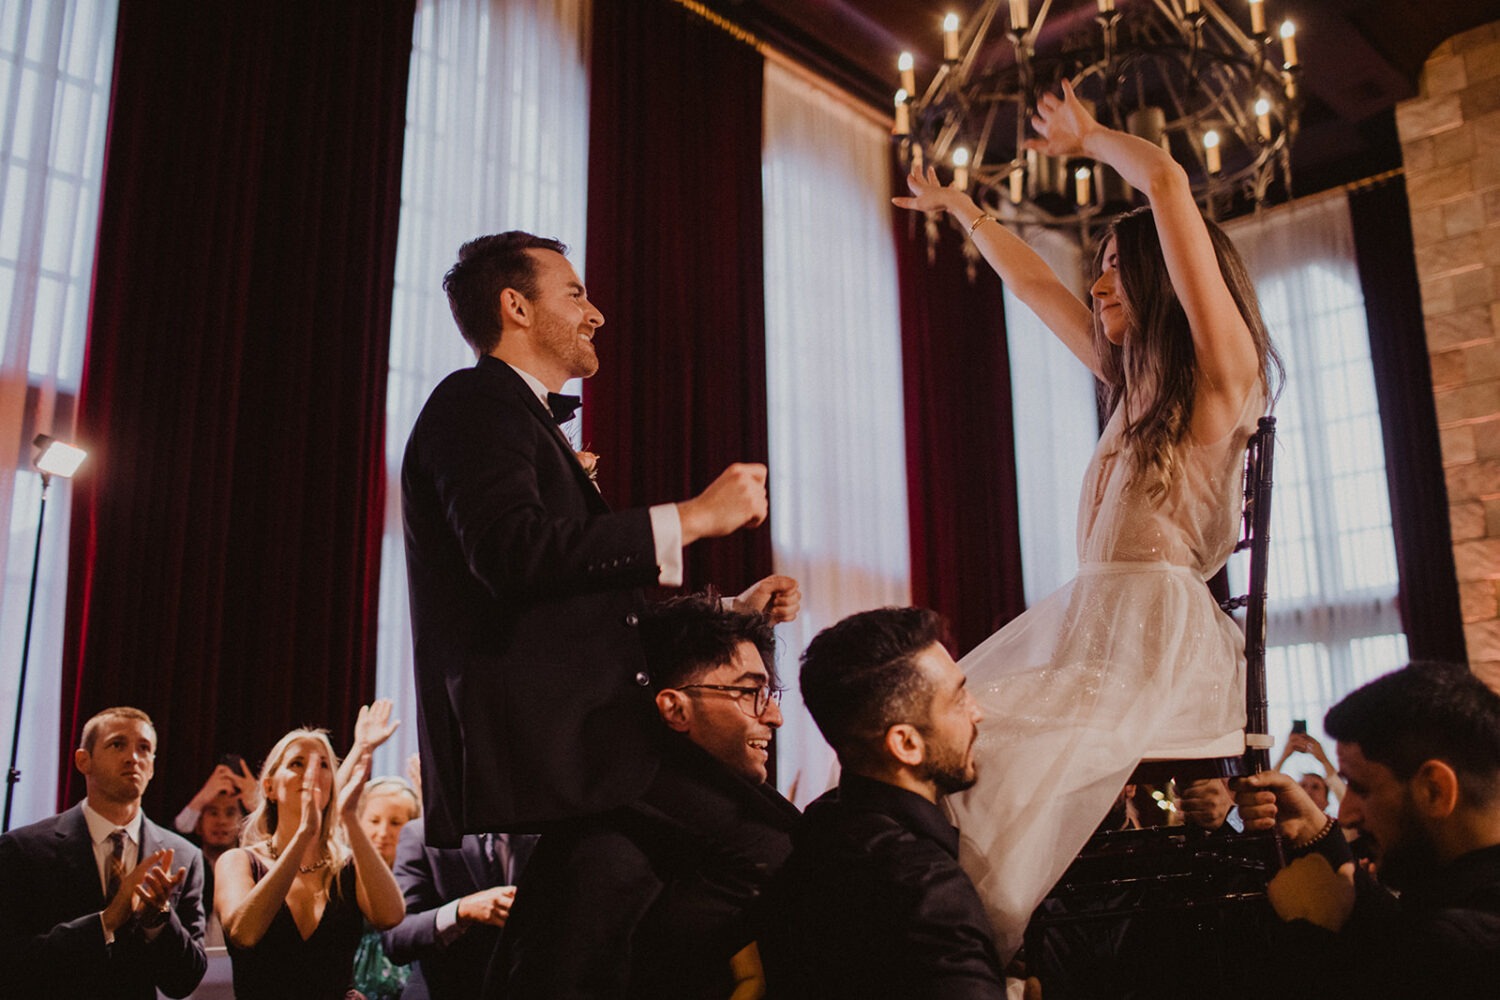 couple dances while lifted up on shoulders and chairs at wedding reception 